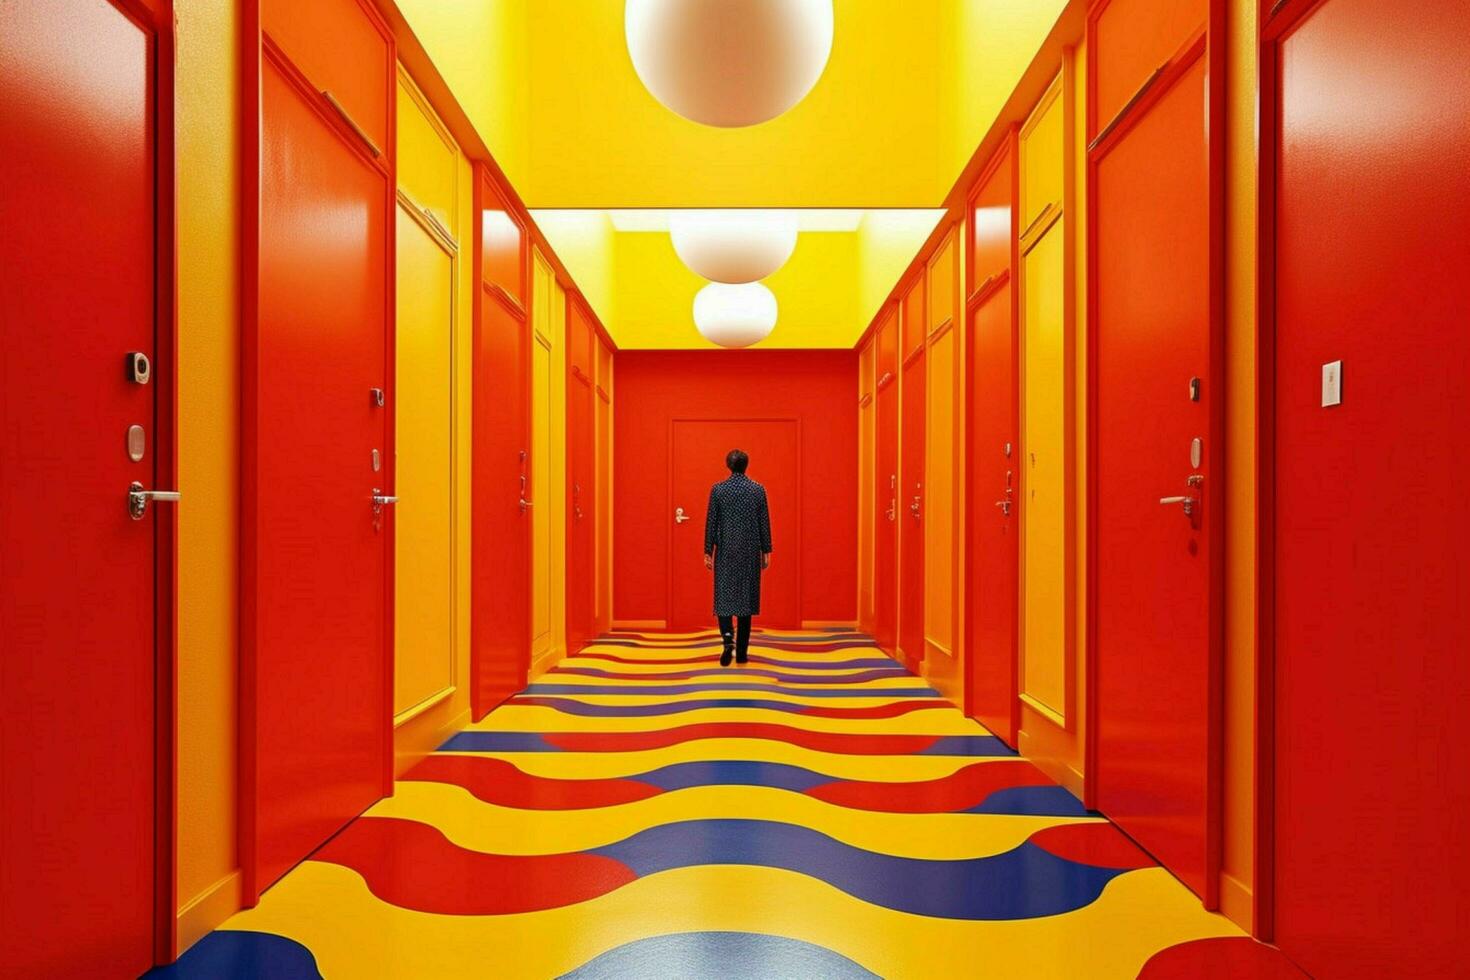 Bold use of primary colors for maximum impact photo